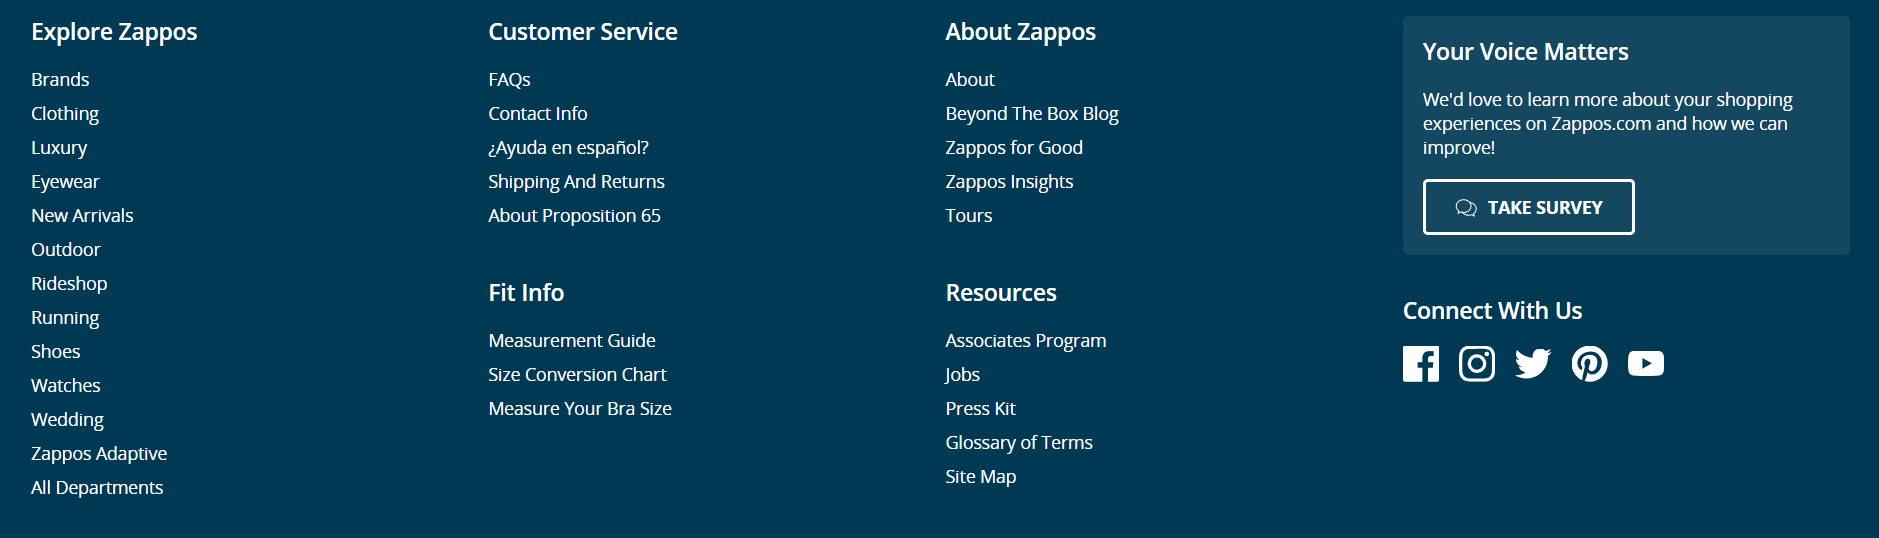 Zappos Fat Footer